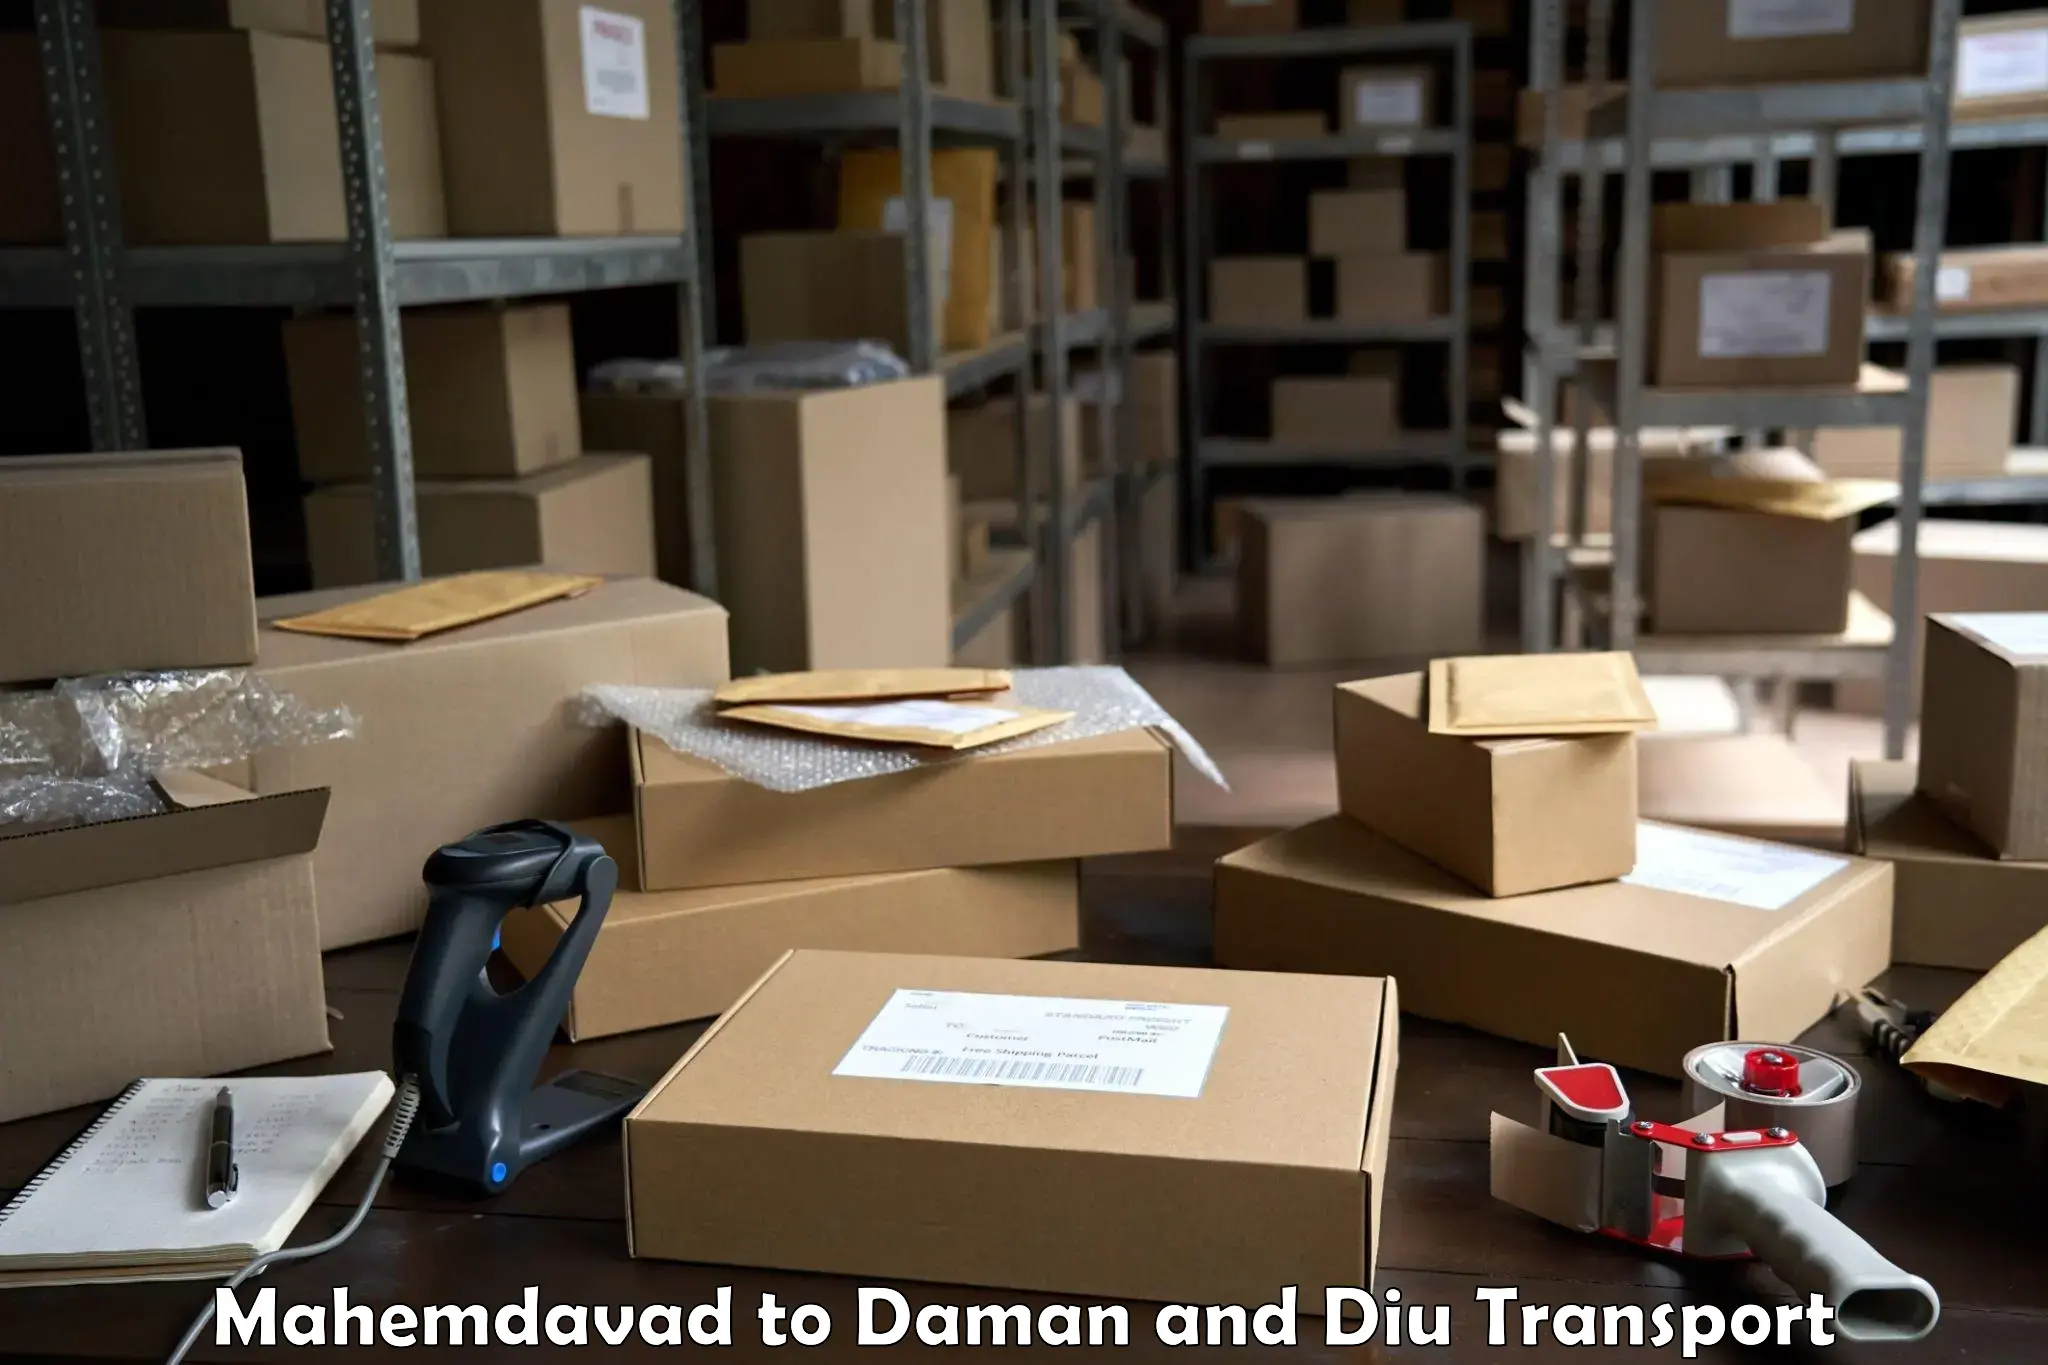 Daily parcel service transport Mahemdavad to Daman and Diu